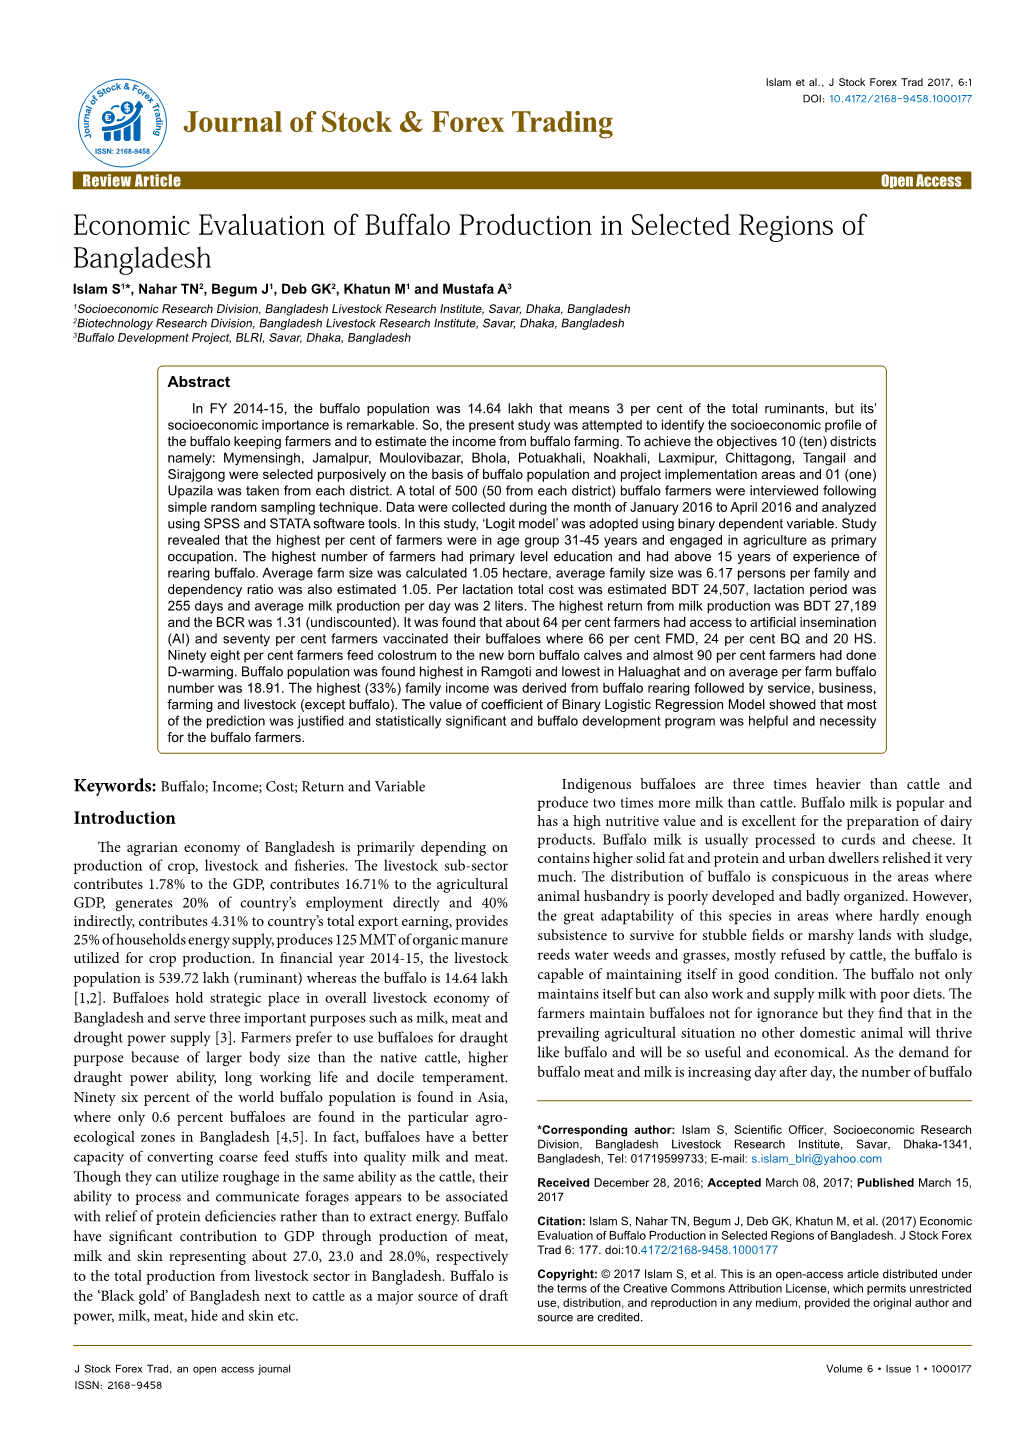 Economic Evaluation of Buffalo Production in Selected Regions of Bangladesh